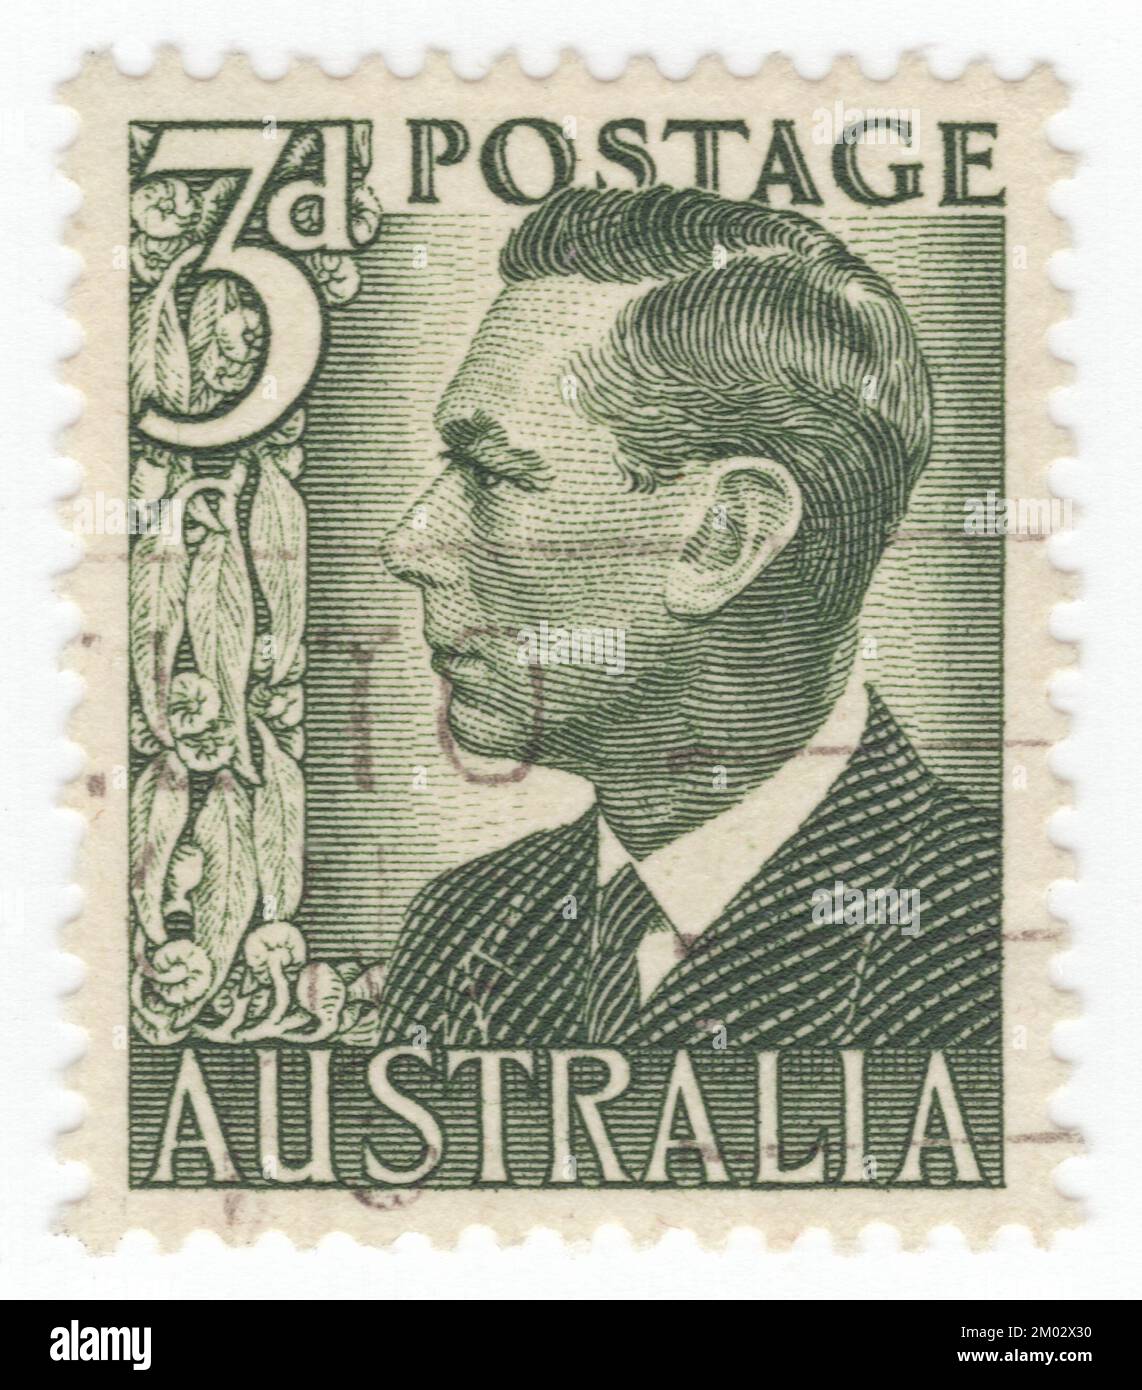 AUSTRALIA — 1951: An 3 pences dull green postage stamp showing portrait of King George VI (Albert Frederick Arthur George; 14 December 1895 – 6 February 1952). He was King of the United Kingdom and the Dominions of the British Commonwealth from 11 December 1936 until his death in 1952. He was concurrently the last Emperor of India until August 1947, when the British Raj was dissolved. The future George VI was born in the reign of his great-grandmother Queen Victoria; he was named Albert at birth after his great-grandfather Albert, Prince Consort, and was known as 'Bertie' Stock Photo